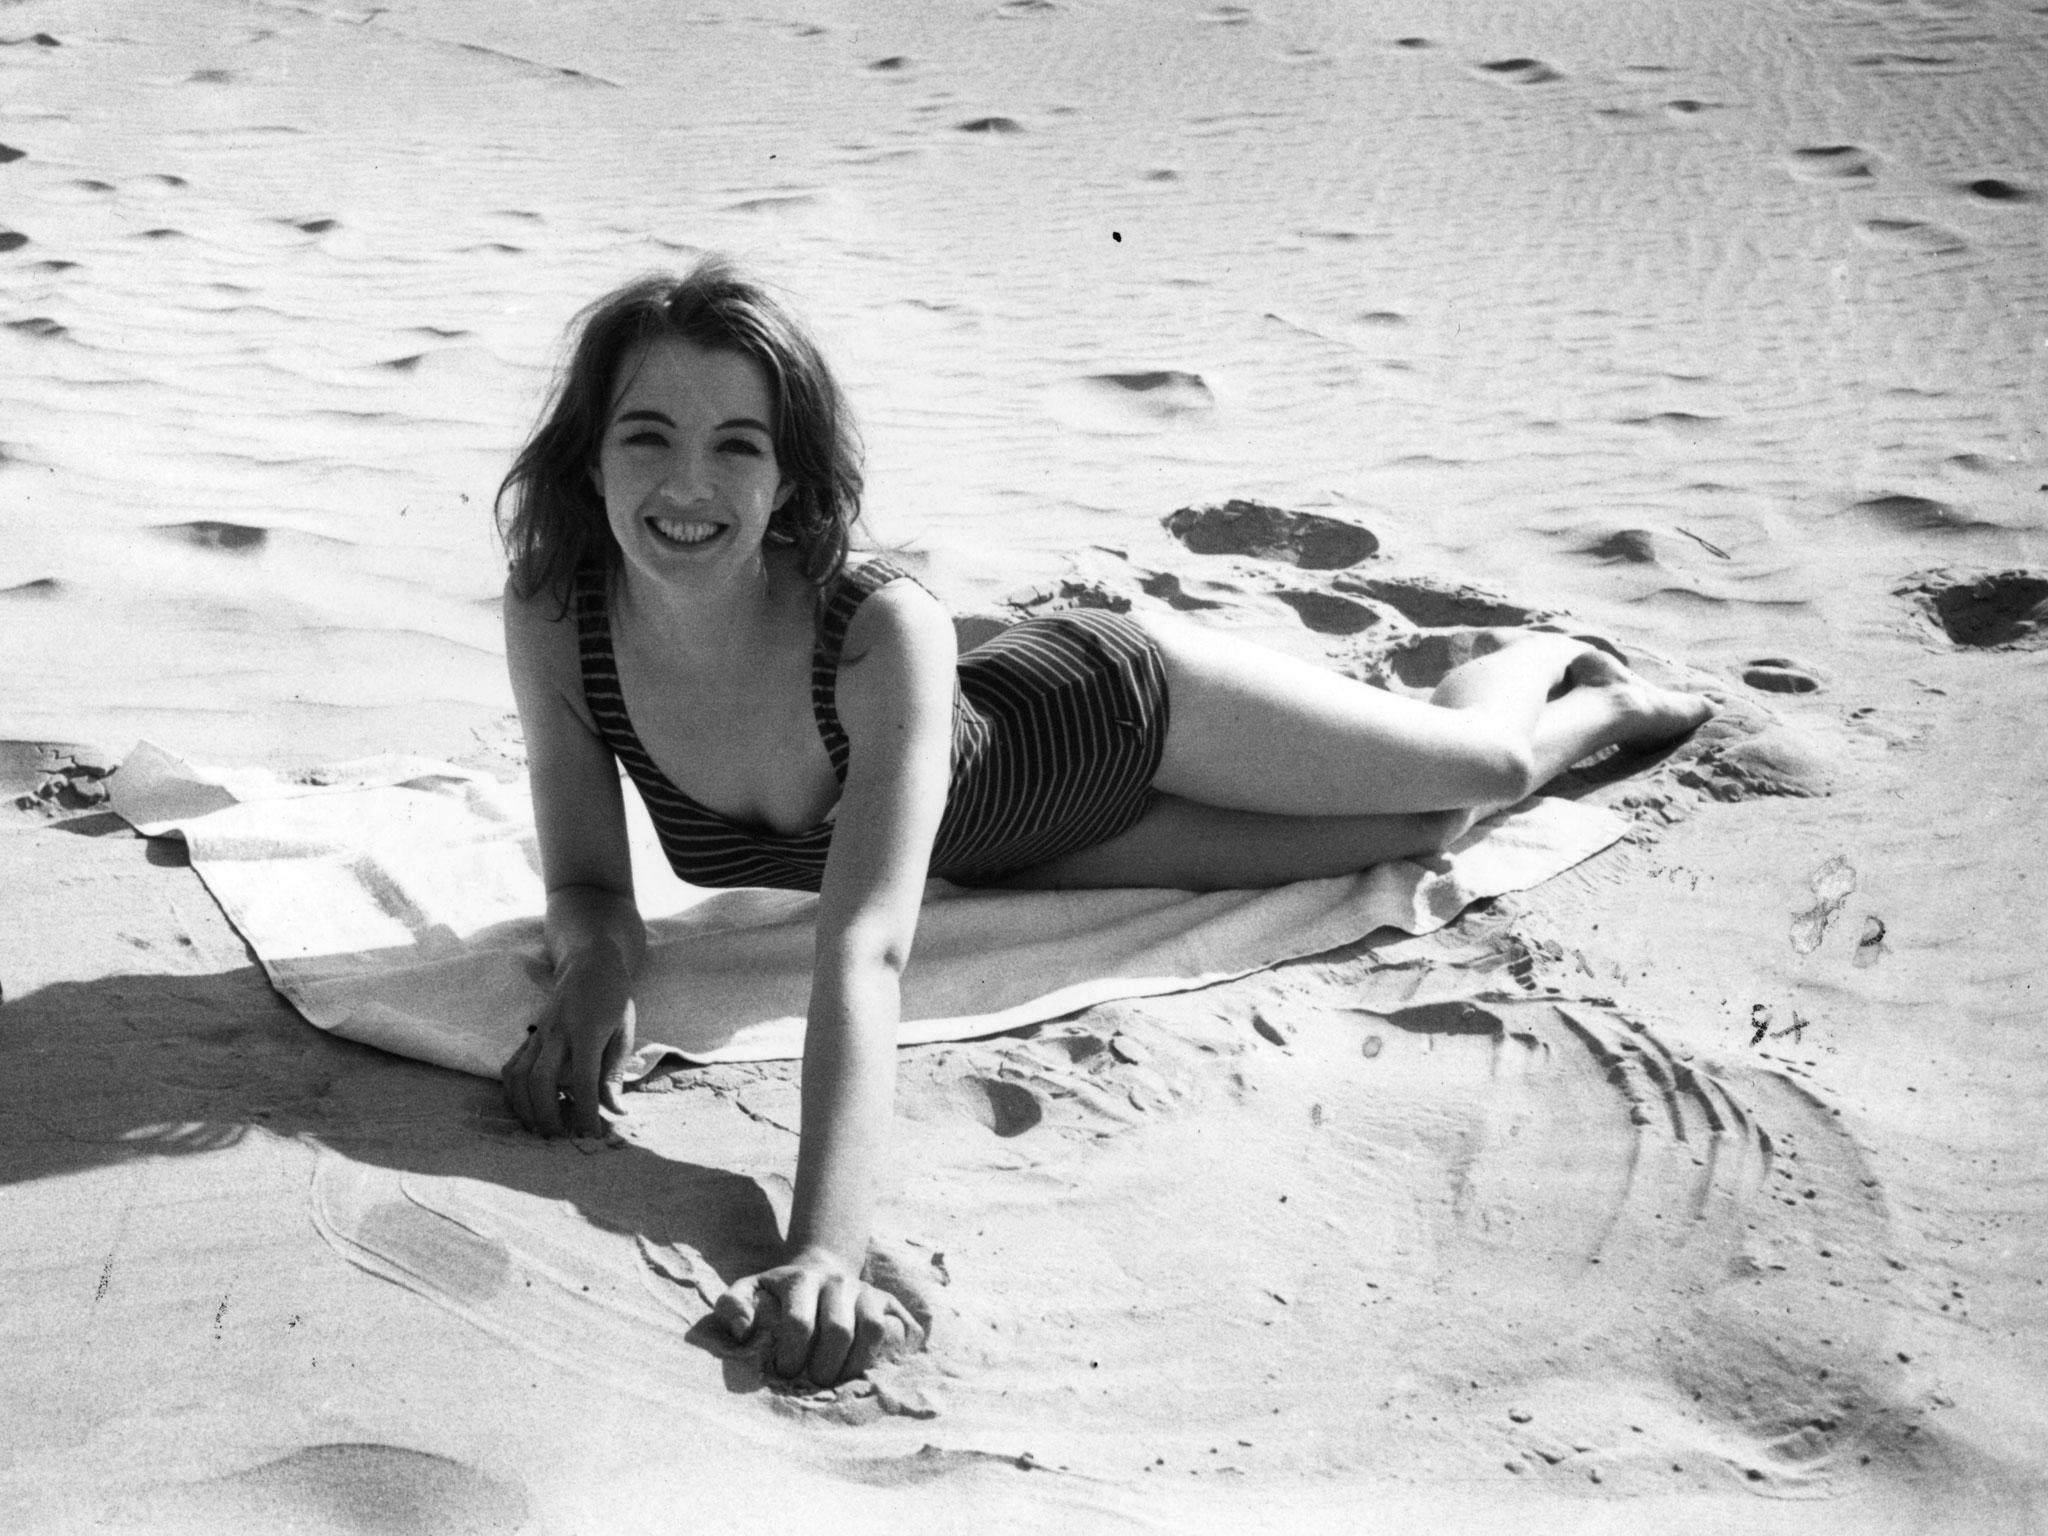 27th March 1963: Christine Keeler takes a holiday in Spain shortly before her controversial involvement with war minister John Profumo led to his resignation.